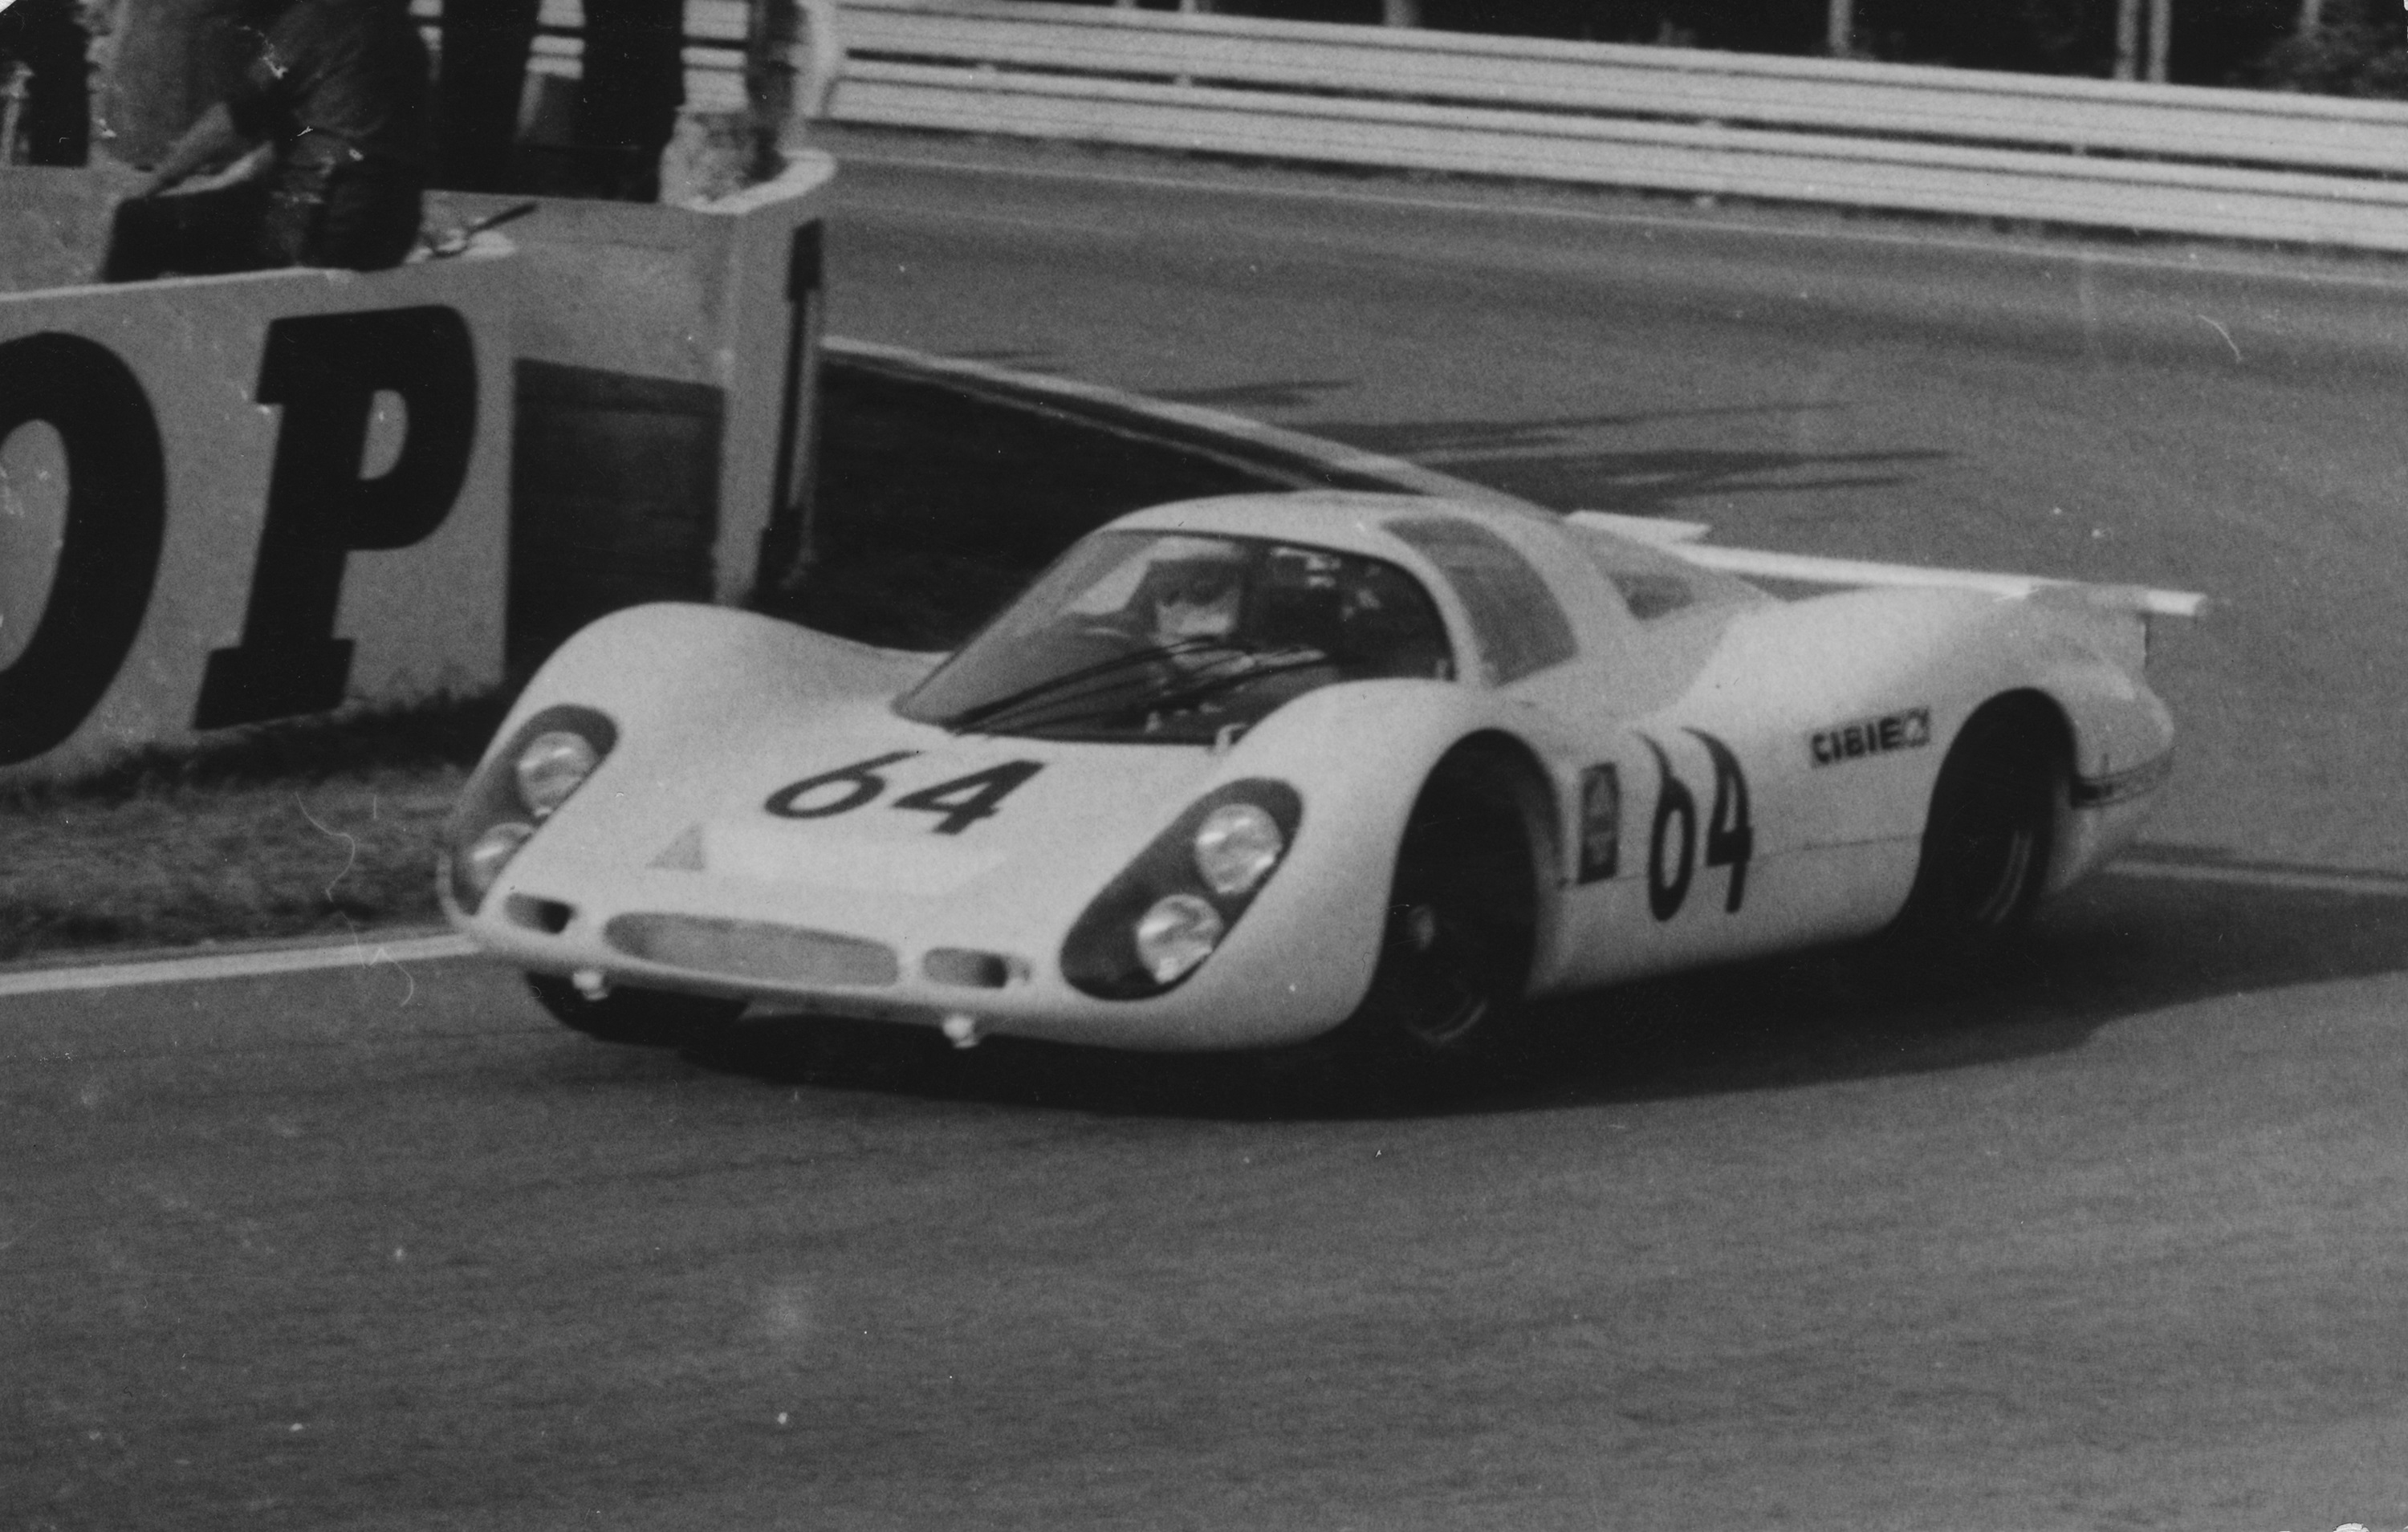 The Porsche 908/8, here the LH version (longtail): though it wasn't as fast as the 917, it was remarkably powerful.